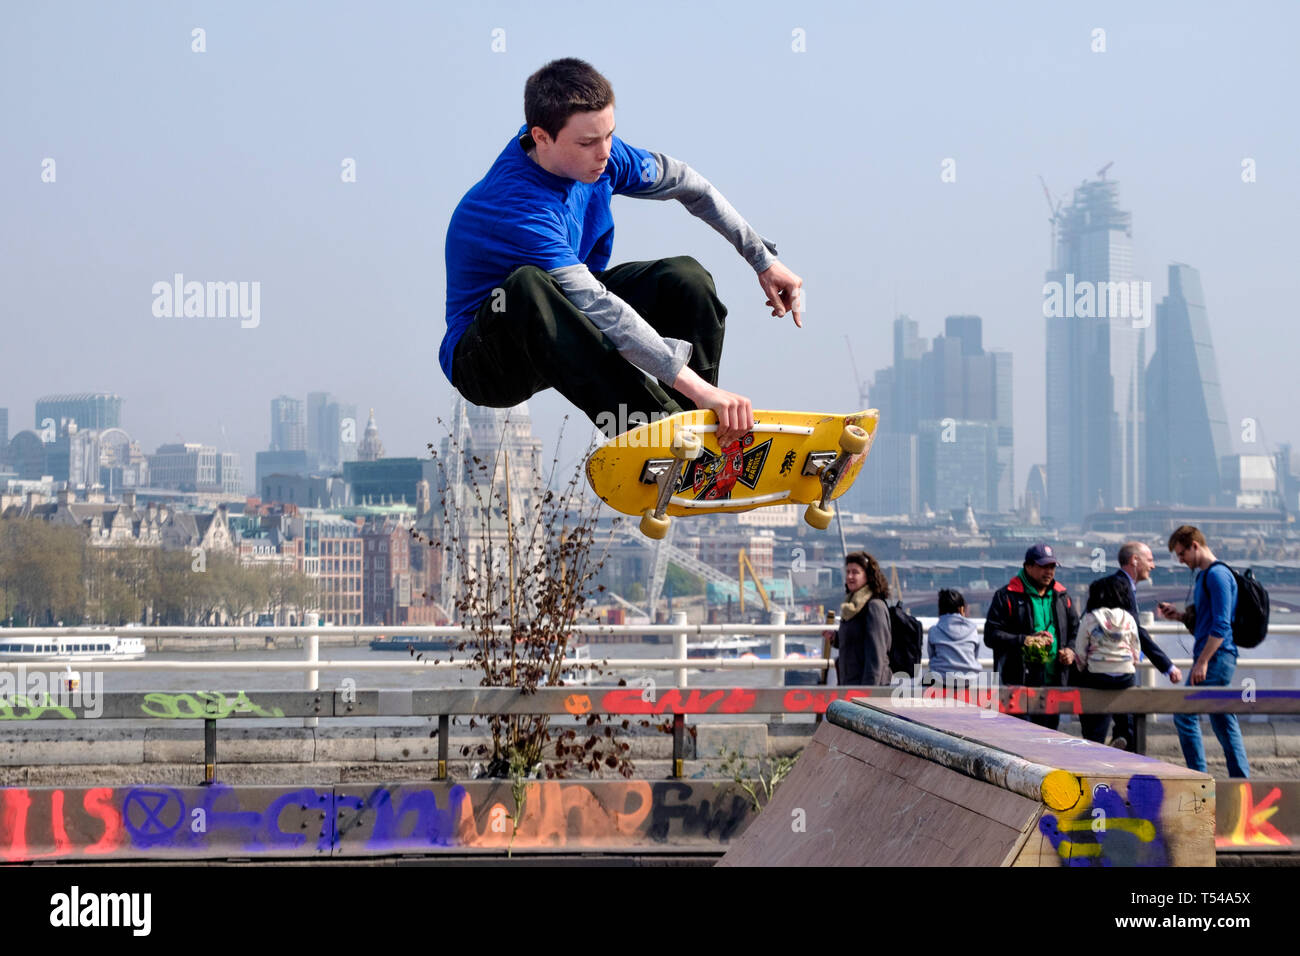 Skateboarder on Waterloo Bridge against a backdrop of the City of London. Stock Photo